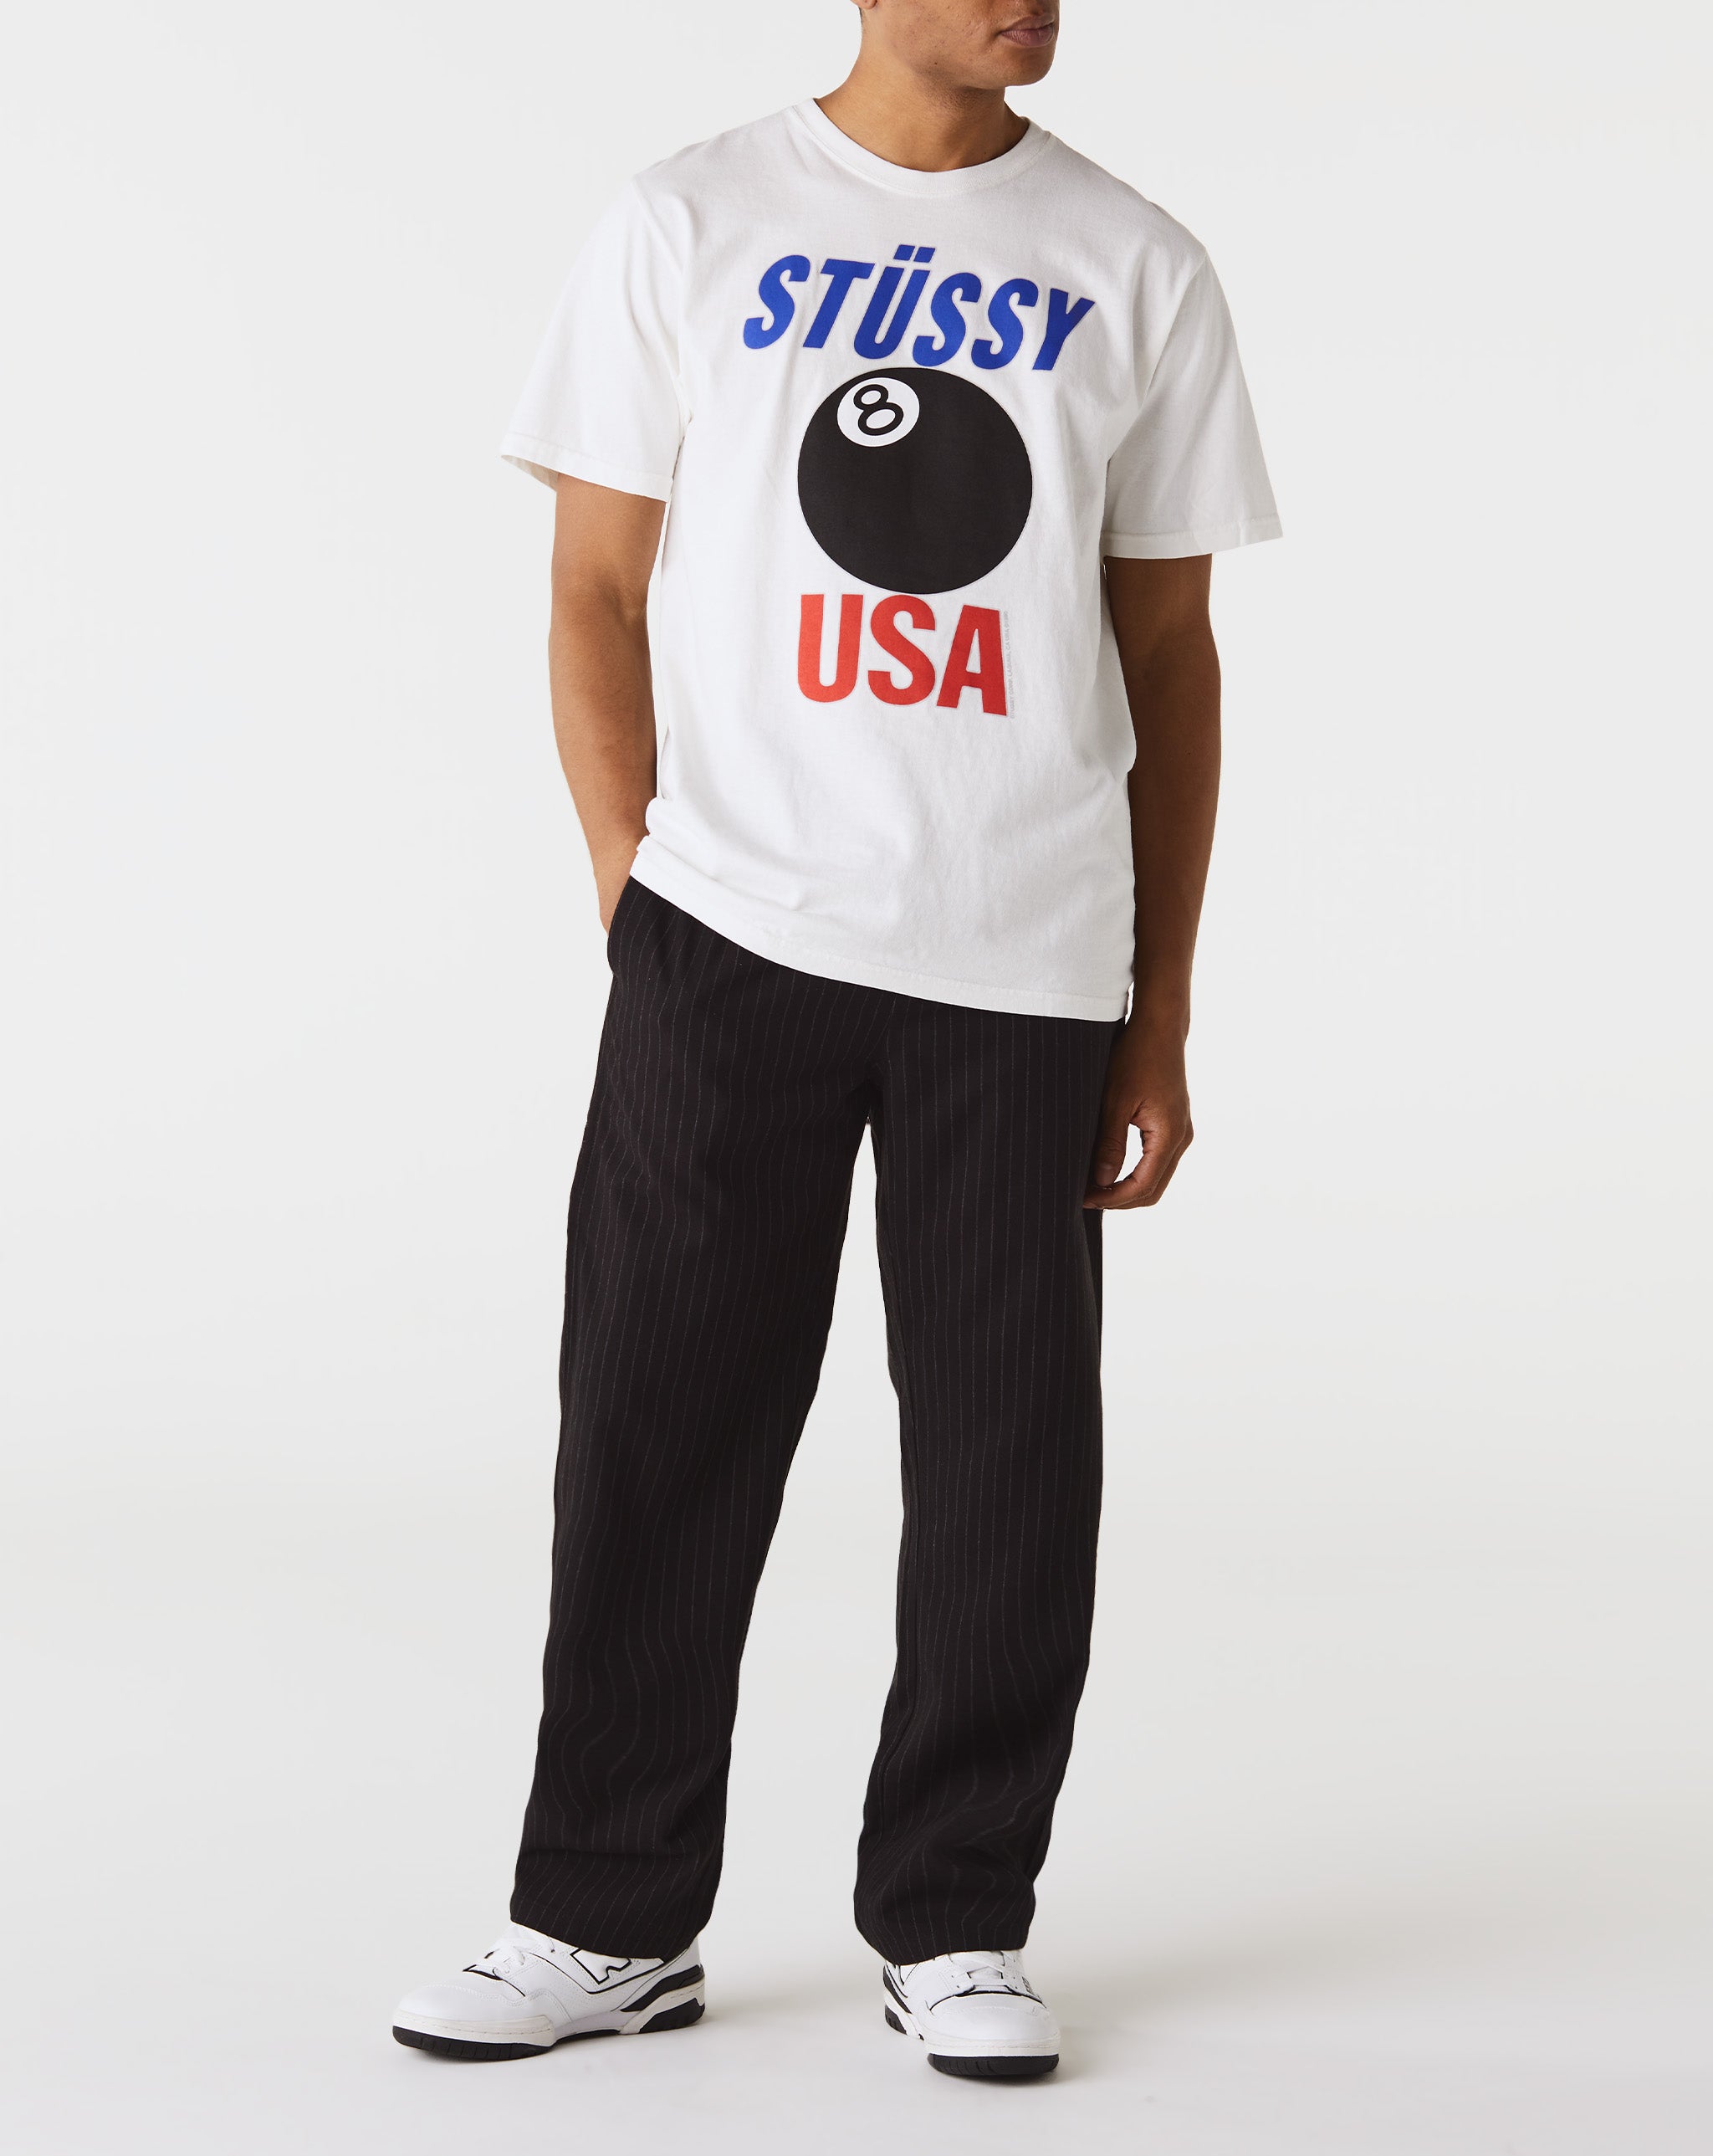 Stüssy Beats the Heat in Puff-Sleeved Dress and Wrapped Toe-Loop Sandals  - Cheap Urlfreeze Jordan outlet